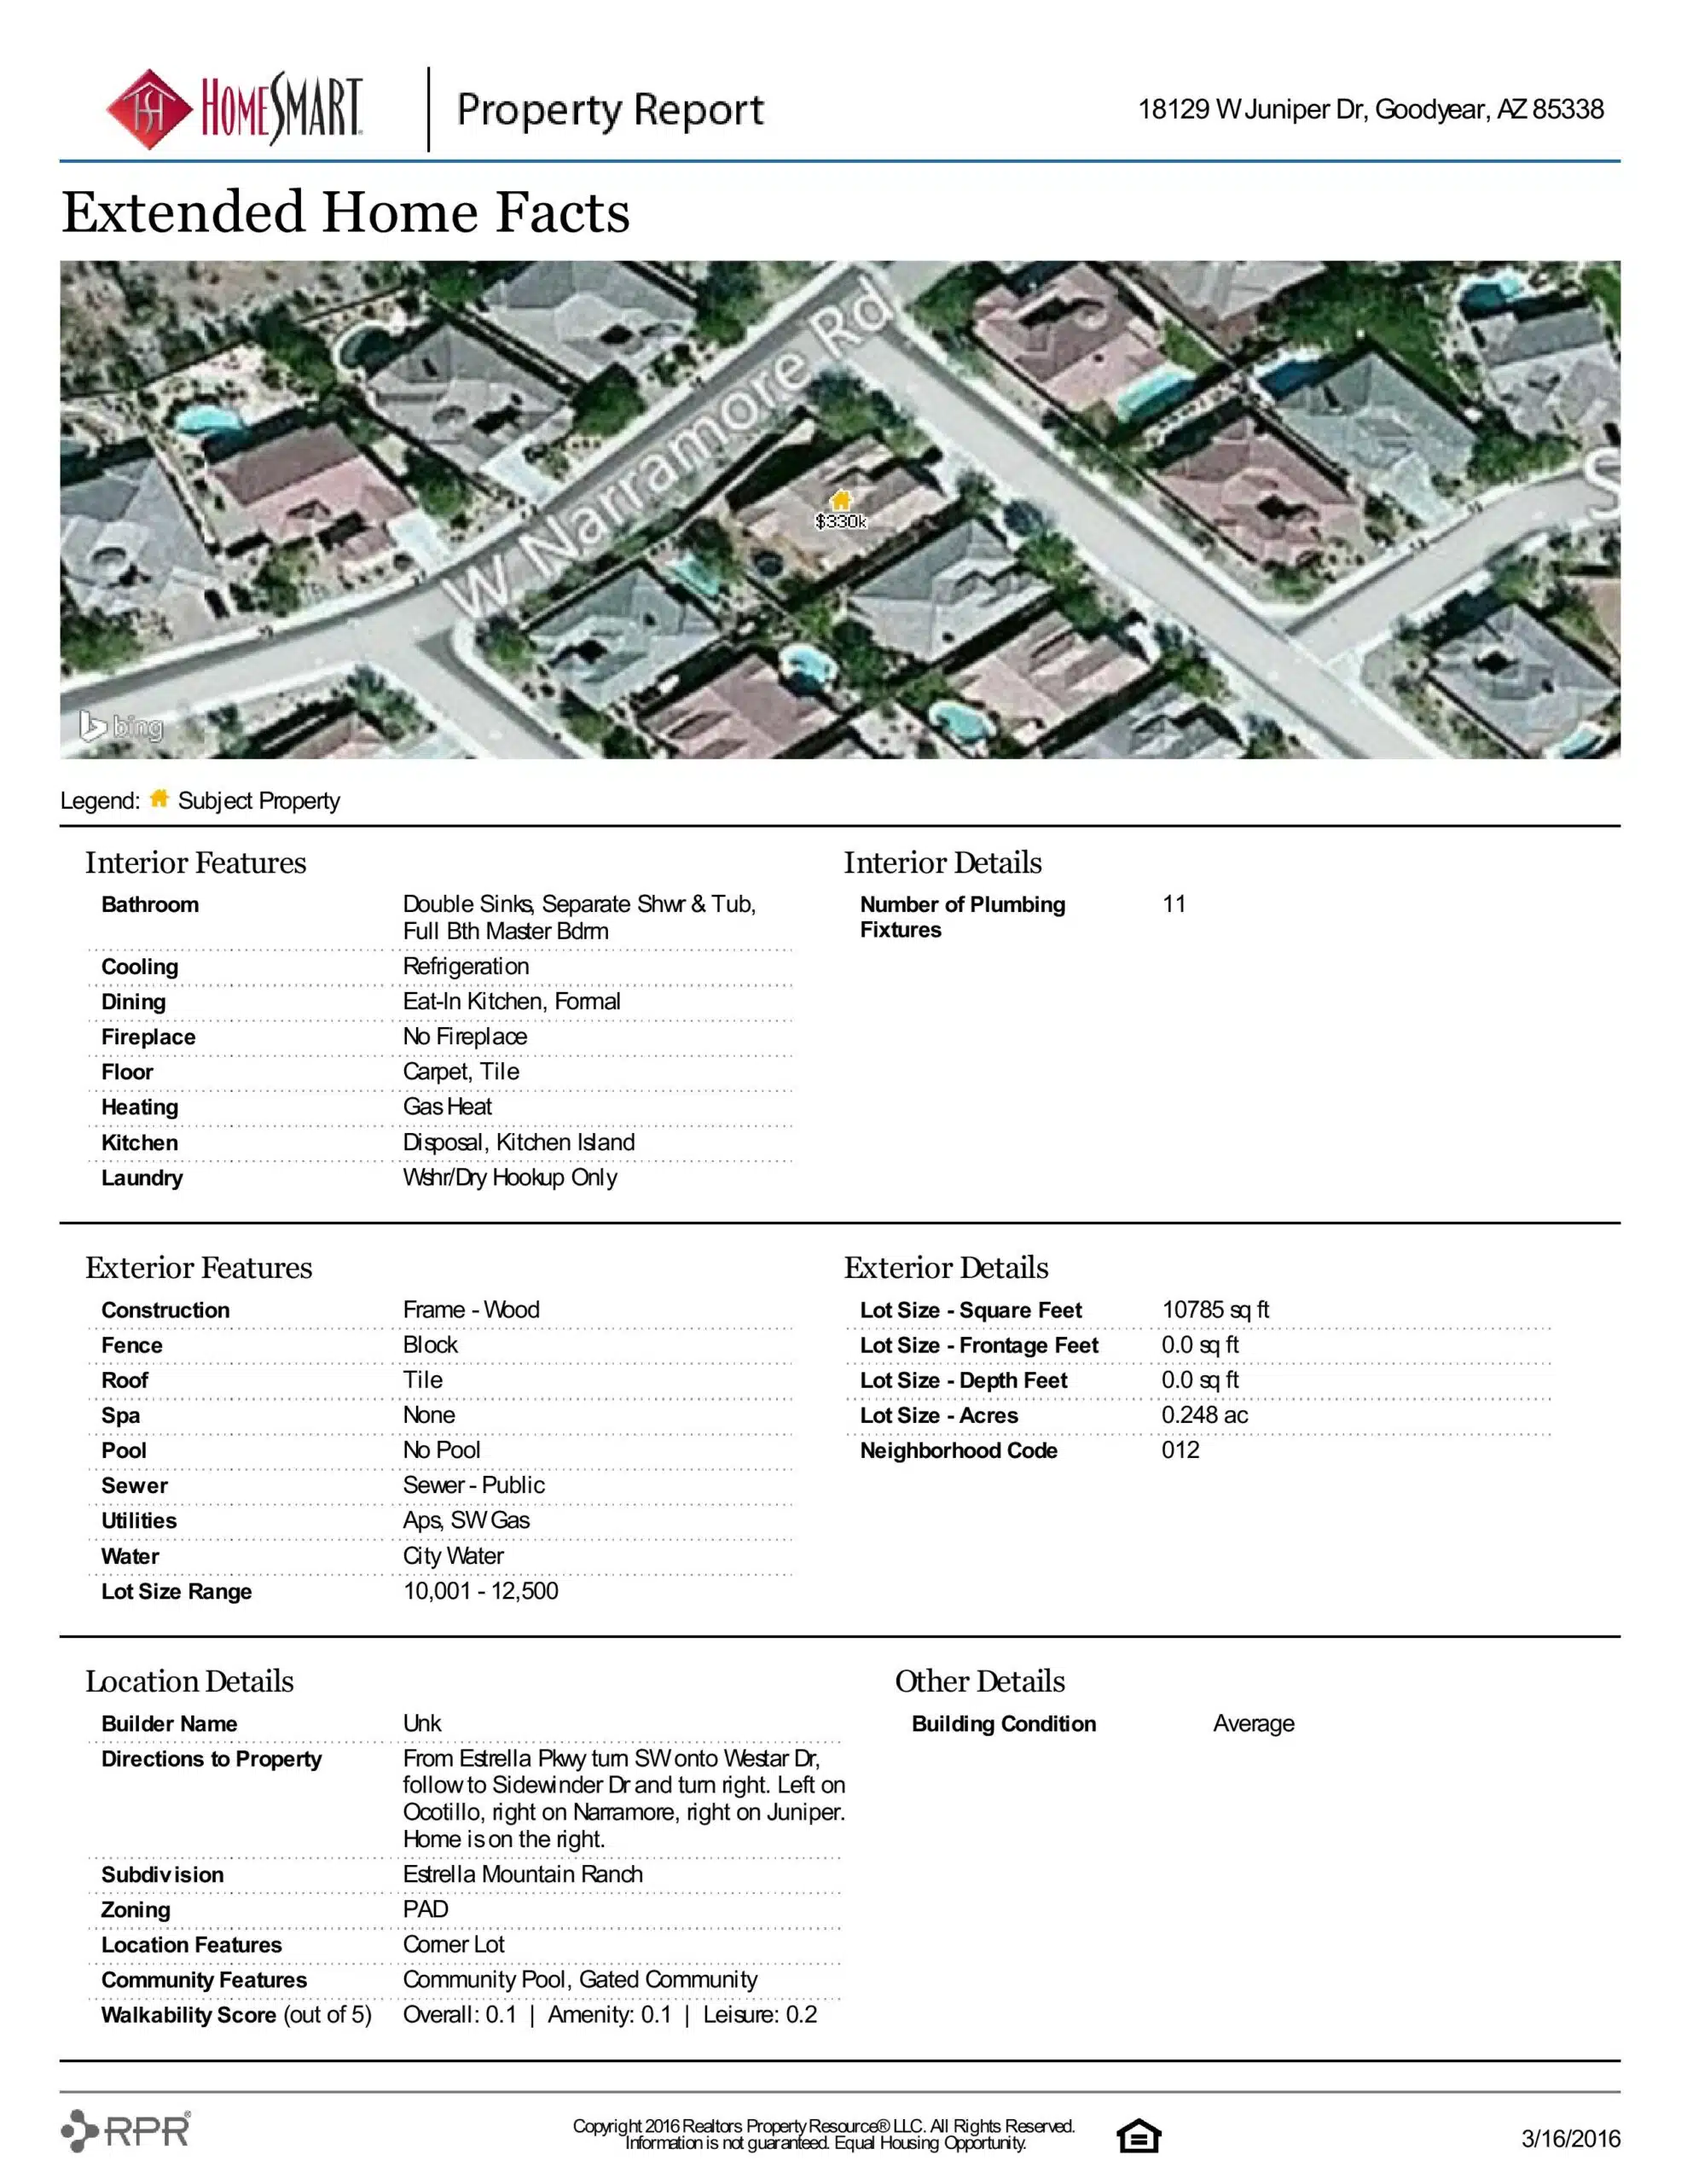 18129 W JUNIPER DR PROPERTY REPORT-page-004